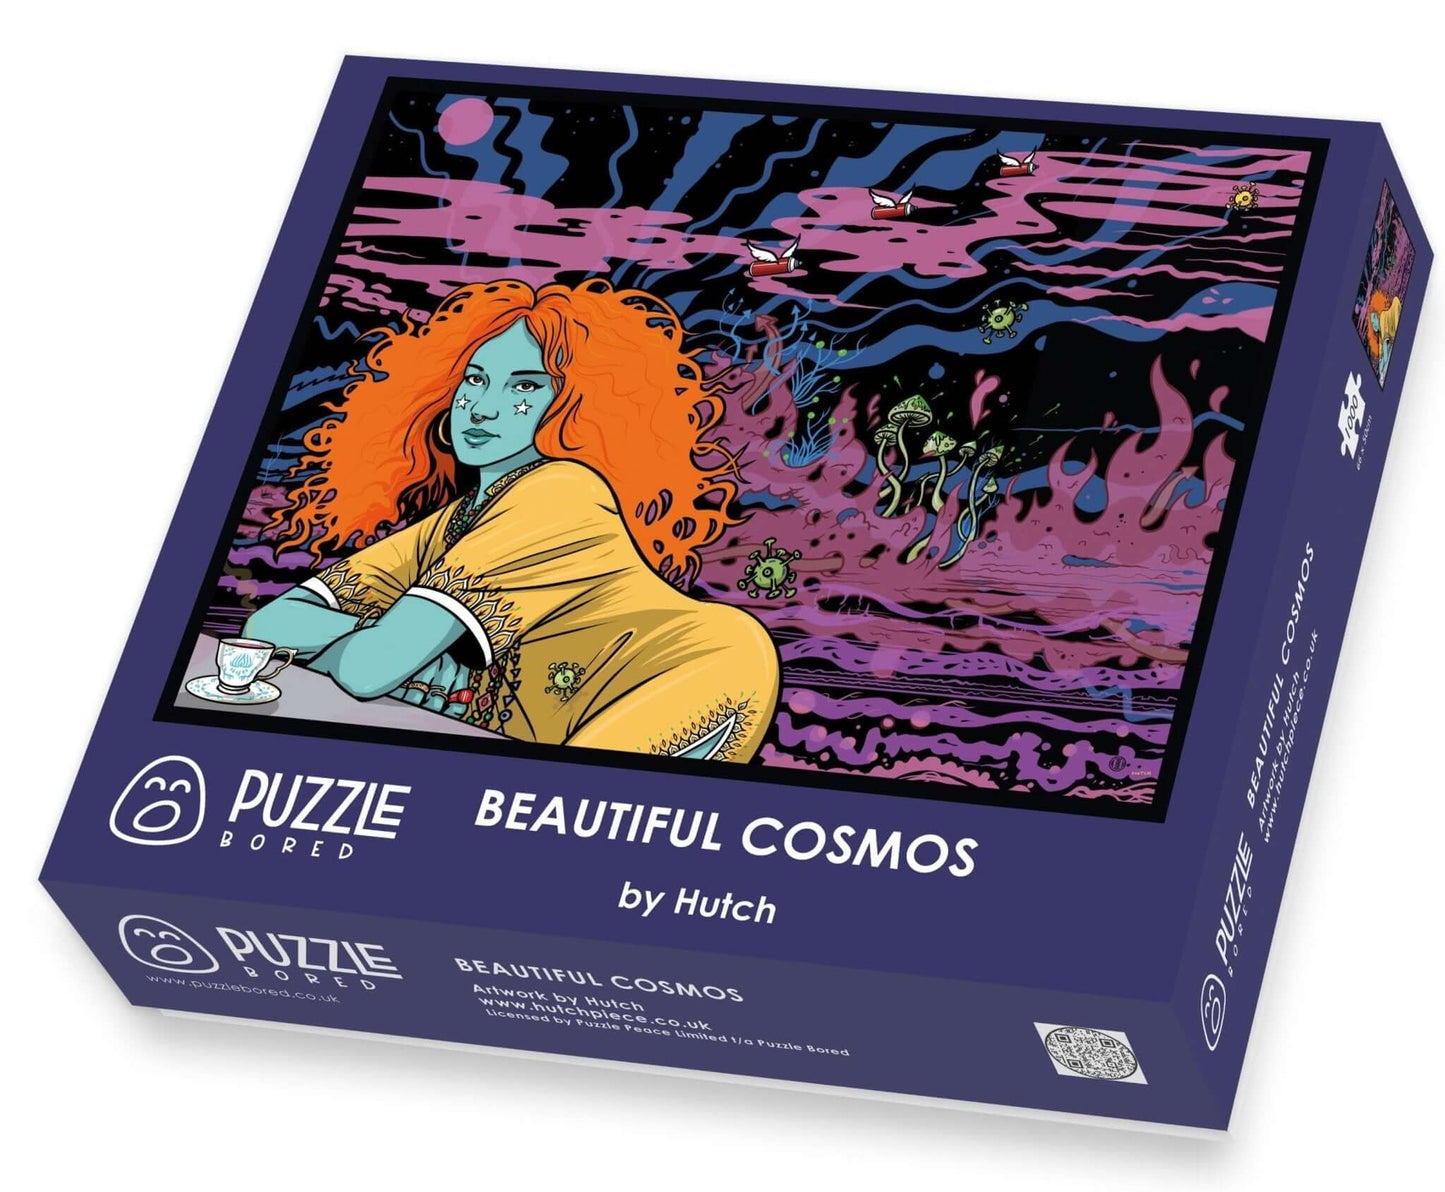 Beautiful Cosmos by Hutch - Puzzle Bored